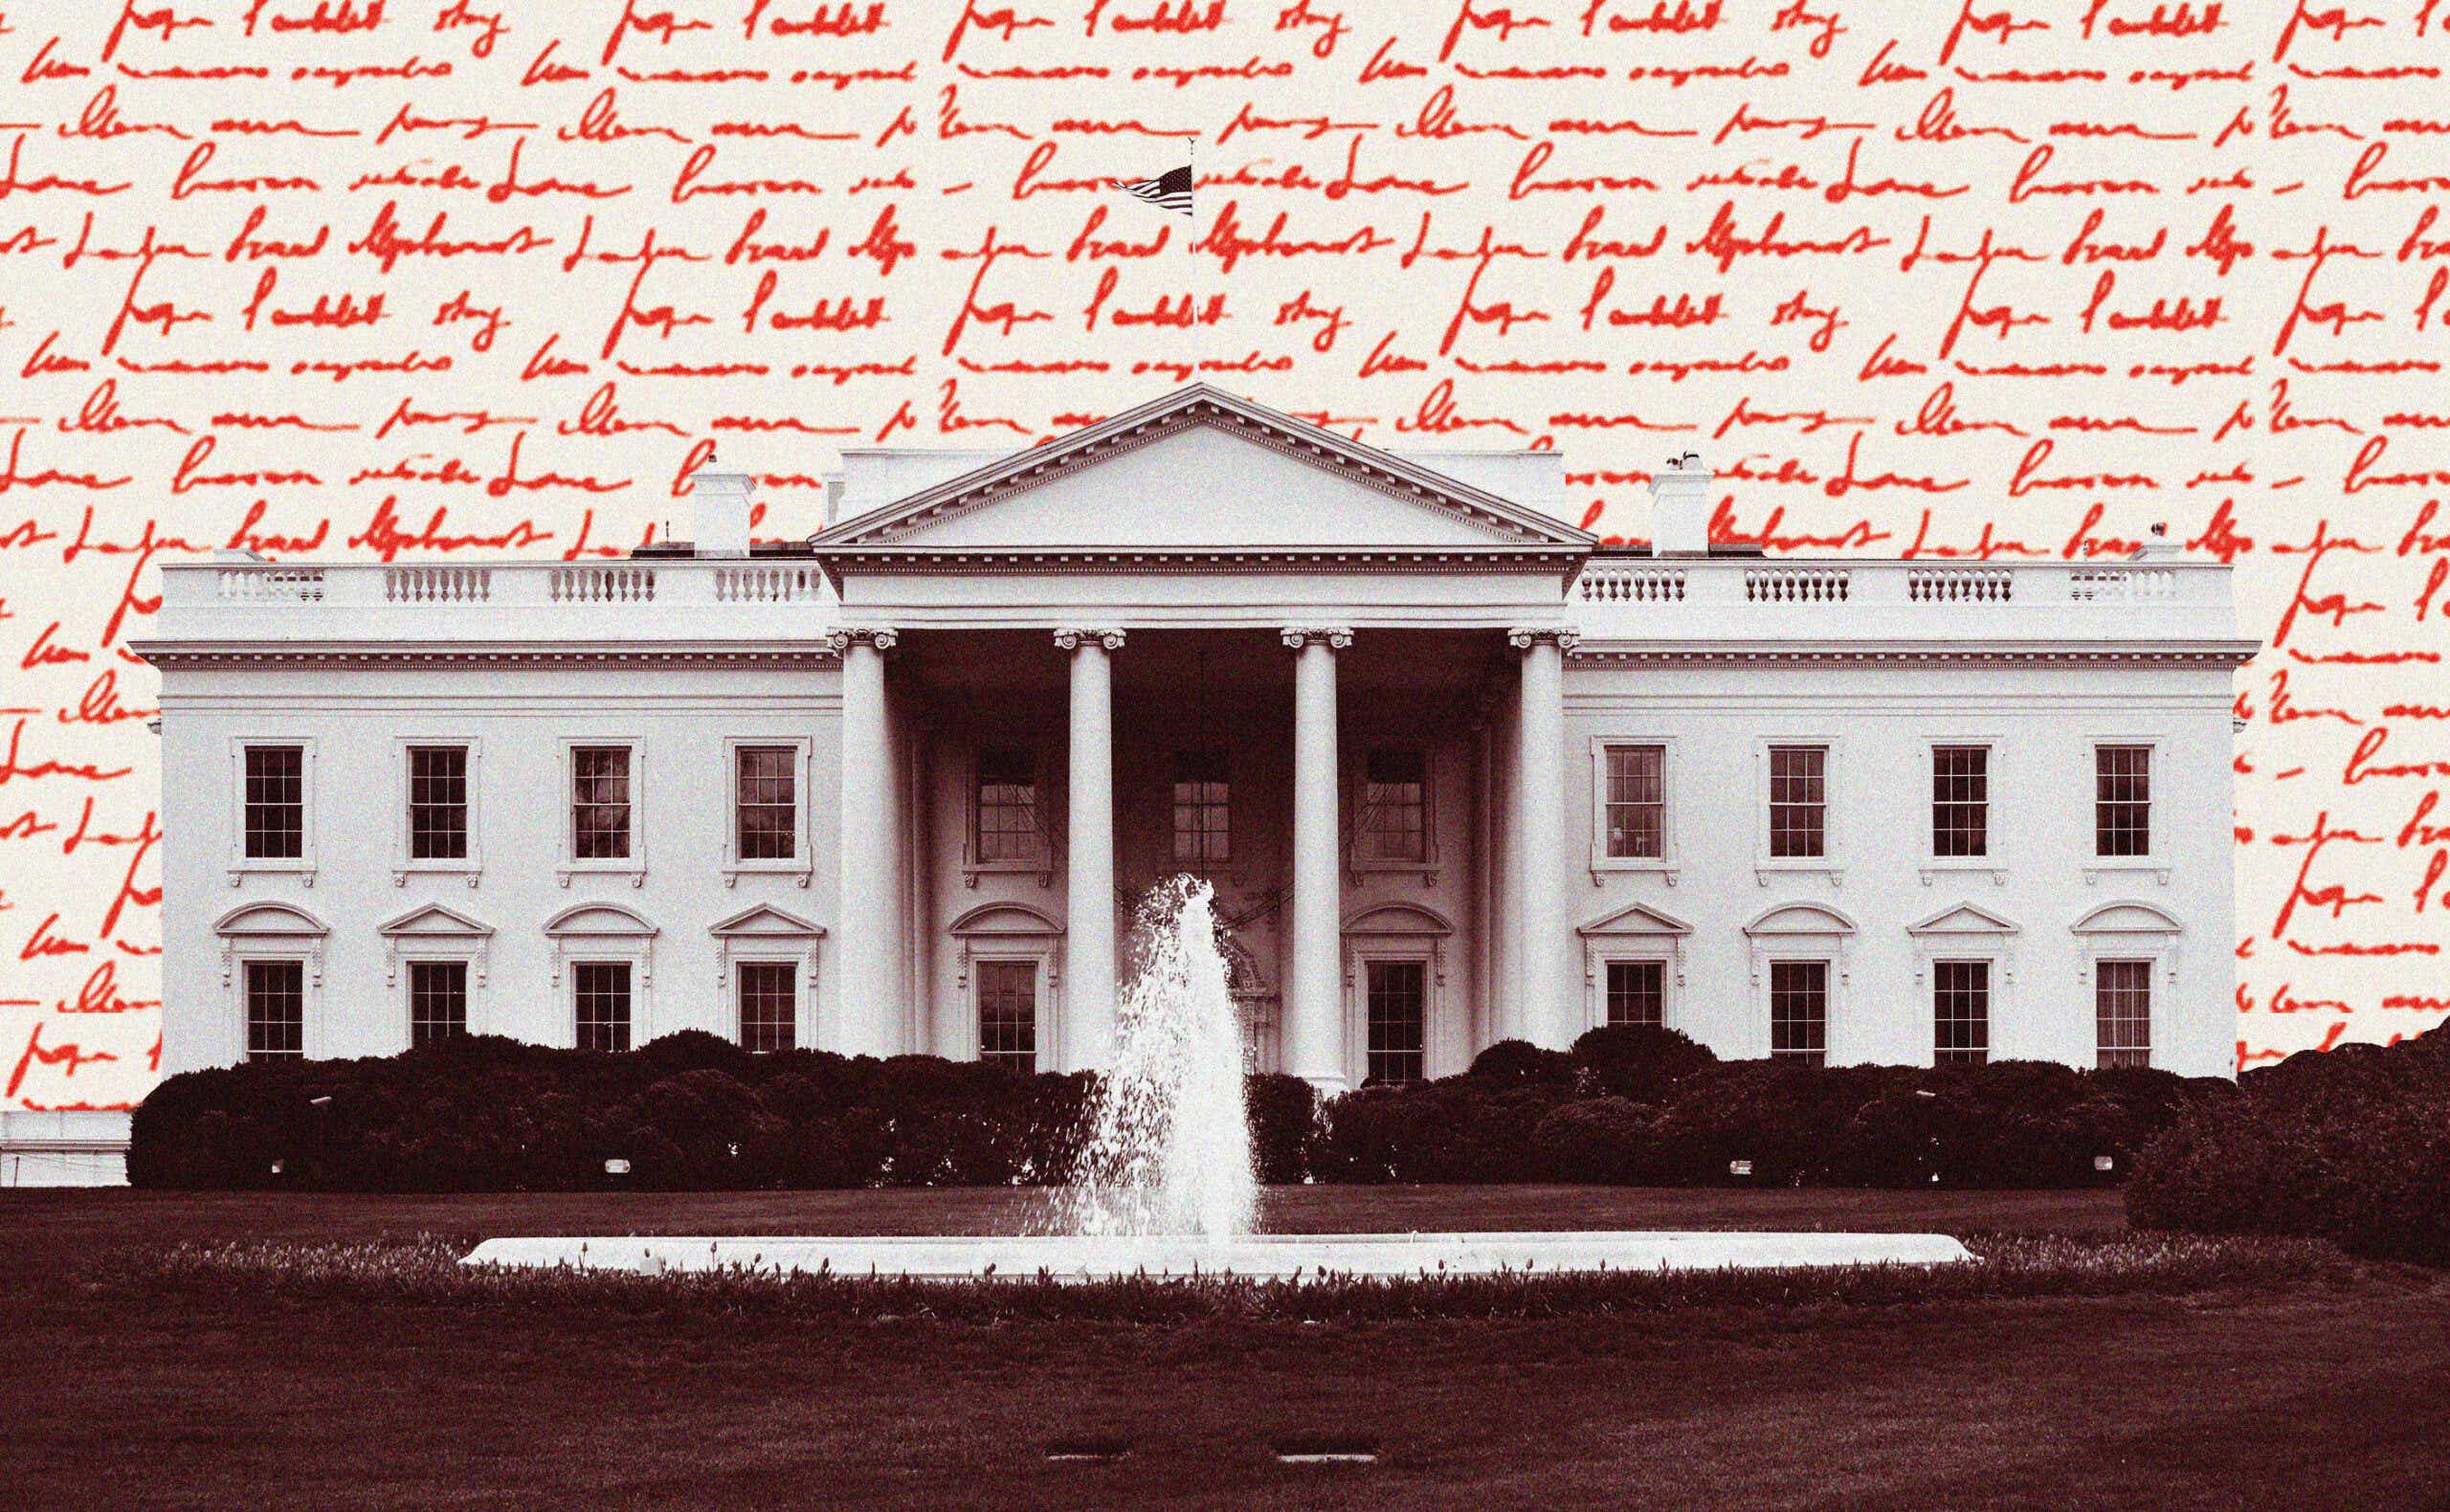 The White House with handwriting overlaid in the sky above